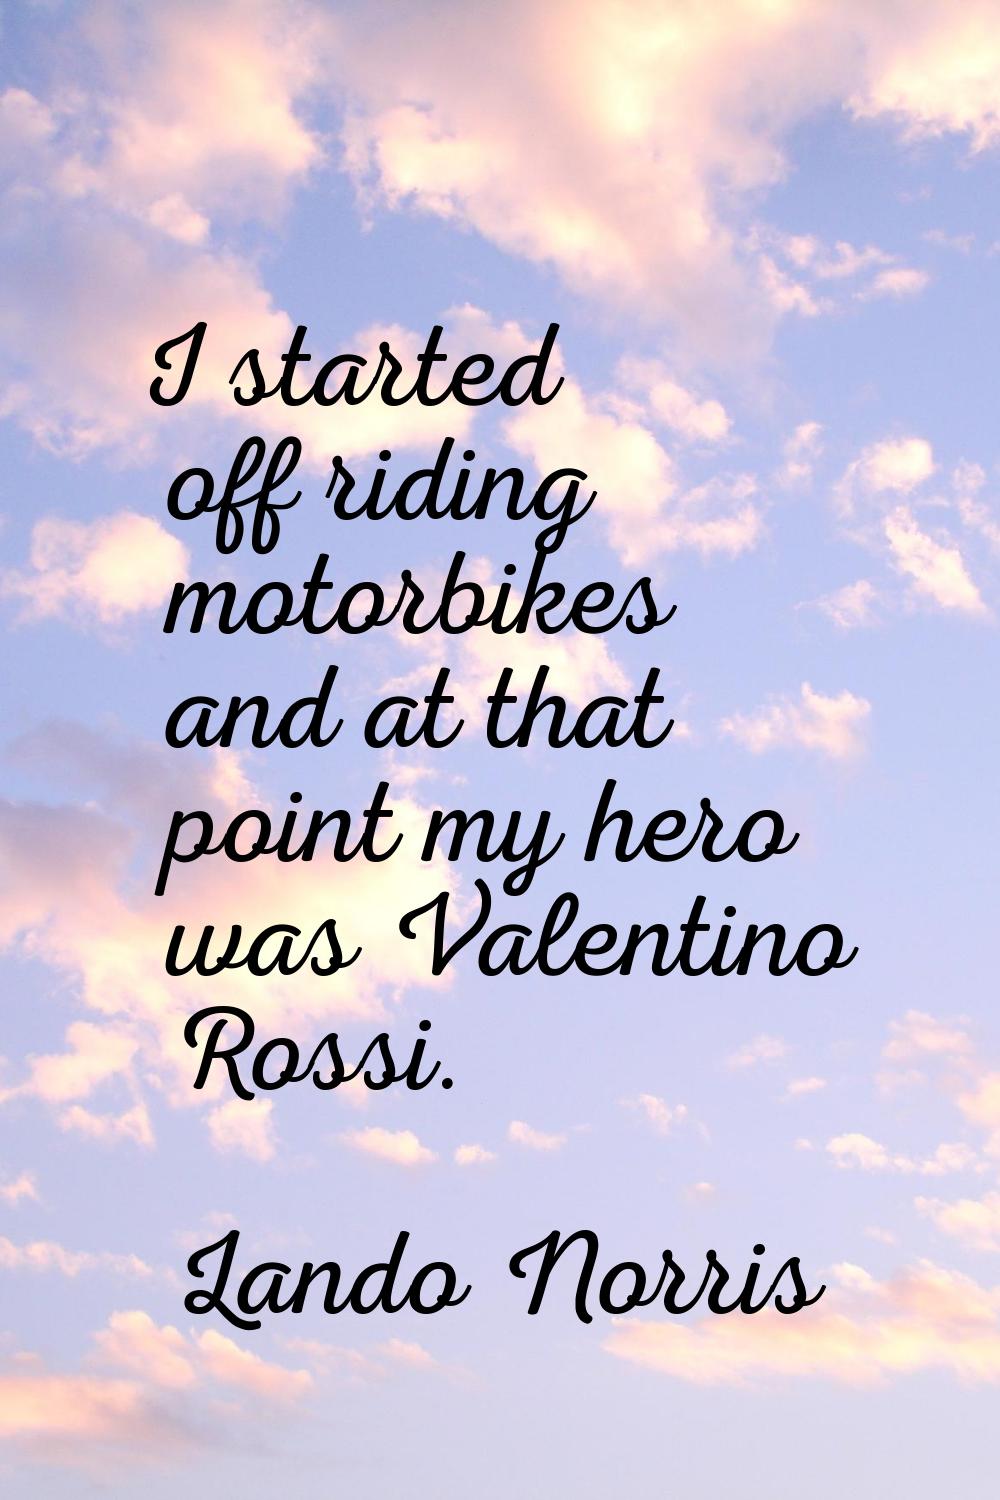 I started off riding motorbikes and at that point my hero was Valentino Rossi.